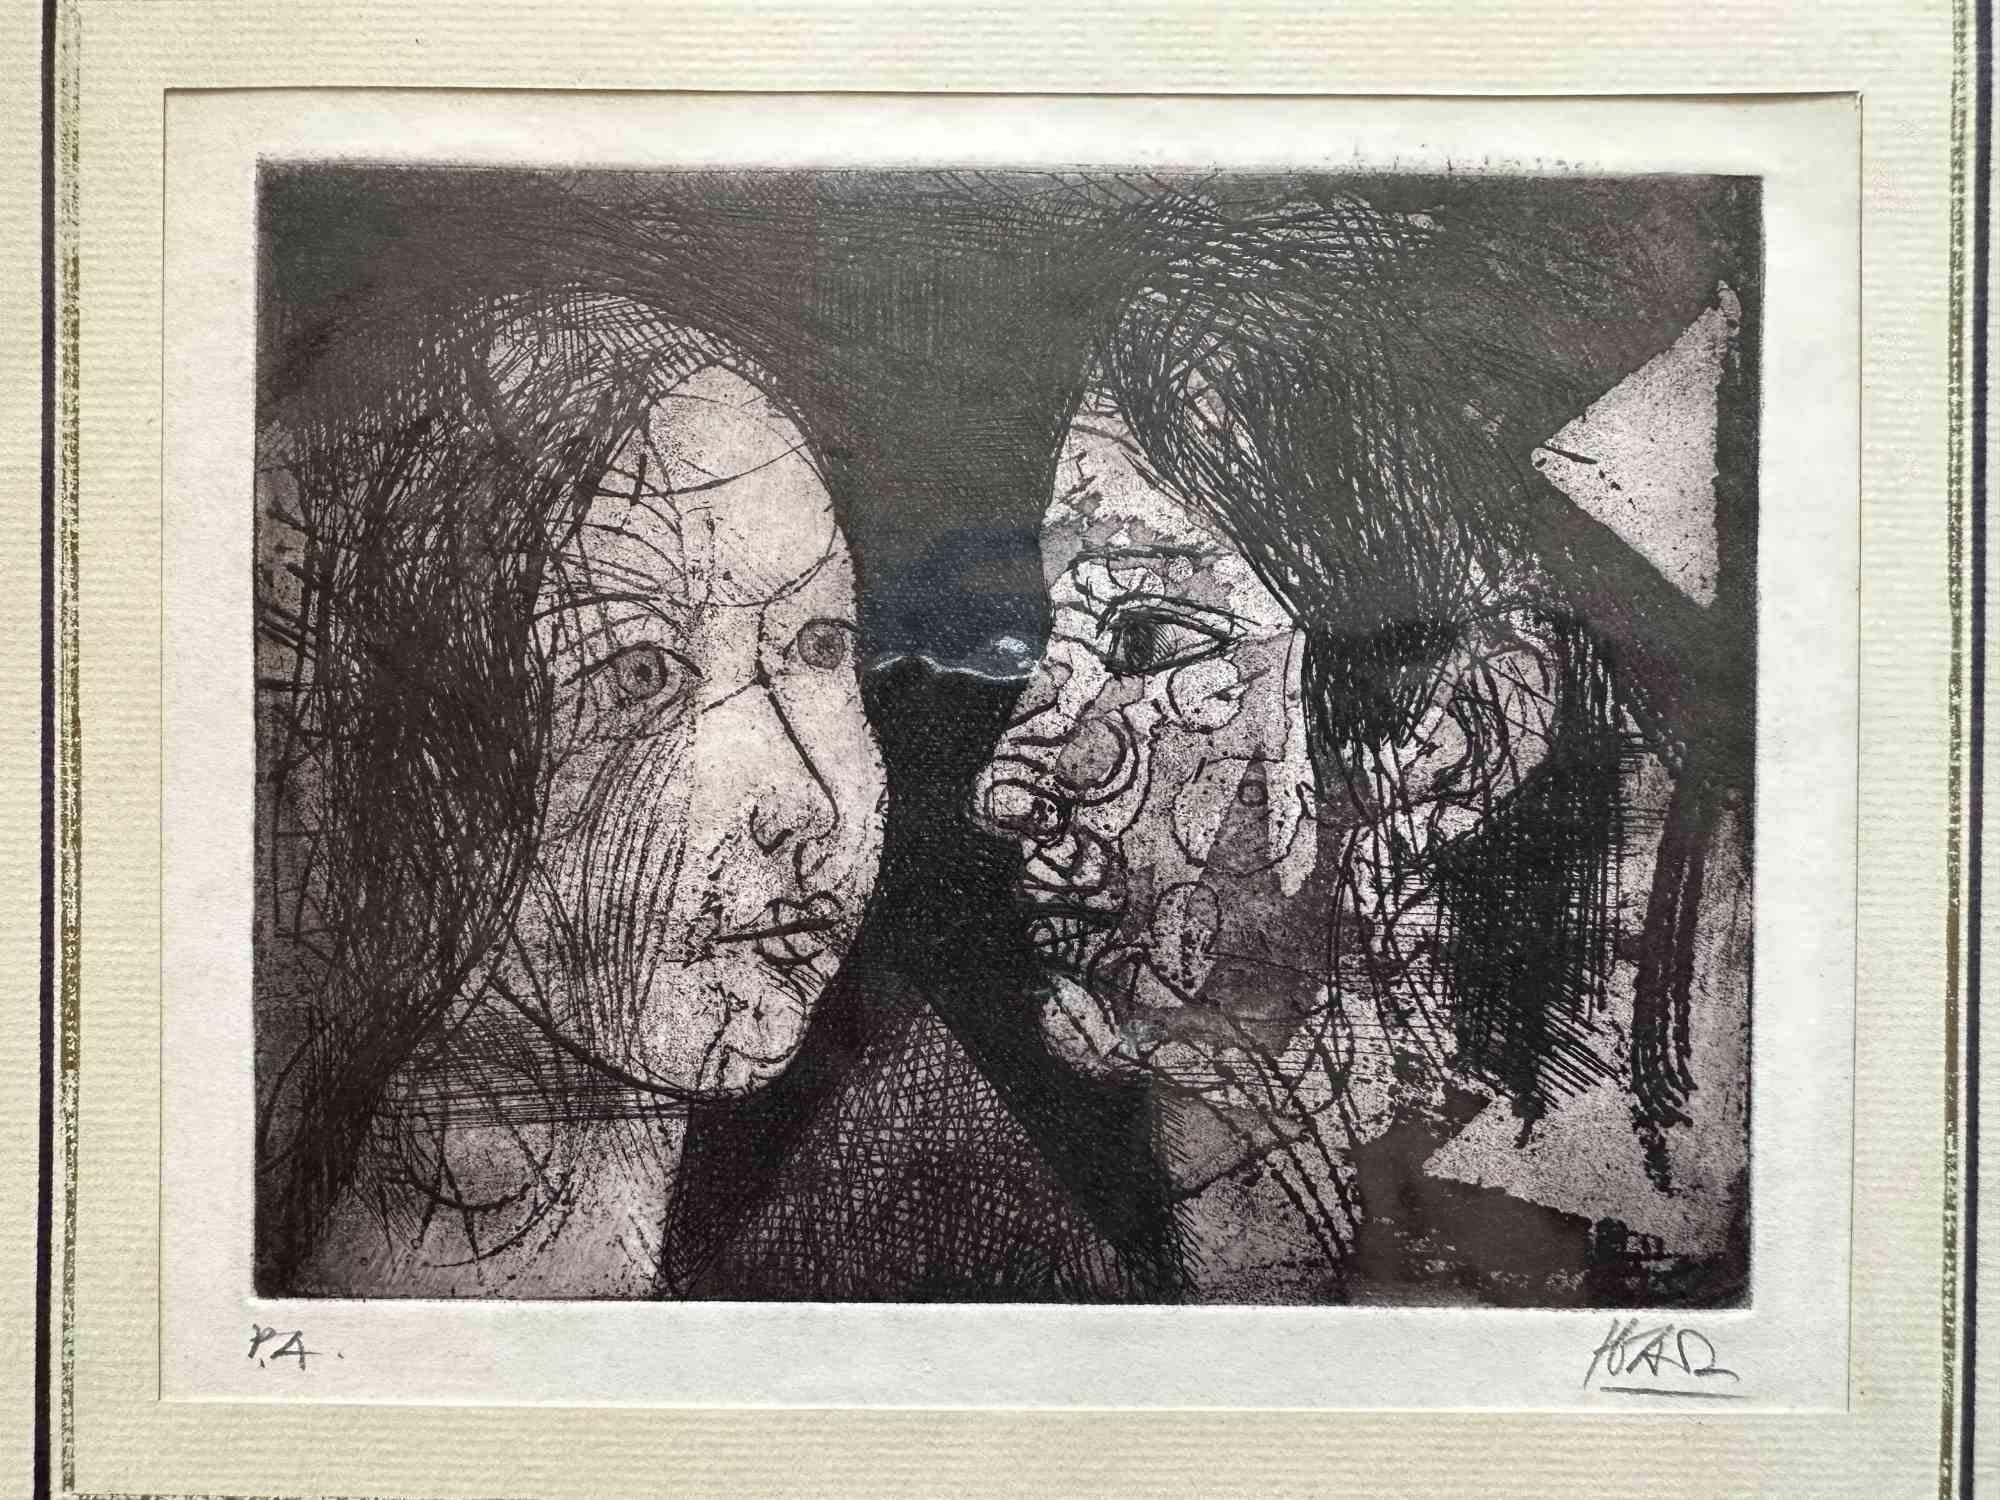 Two Faces - Etching by Miguel Angel Ibarz - 1960s